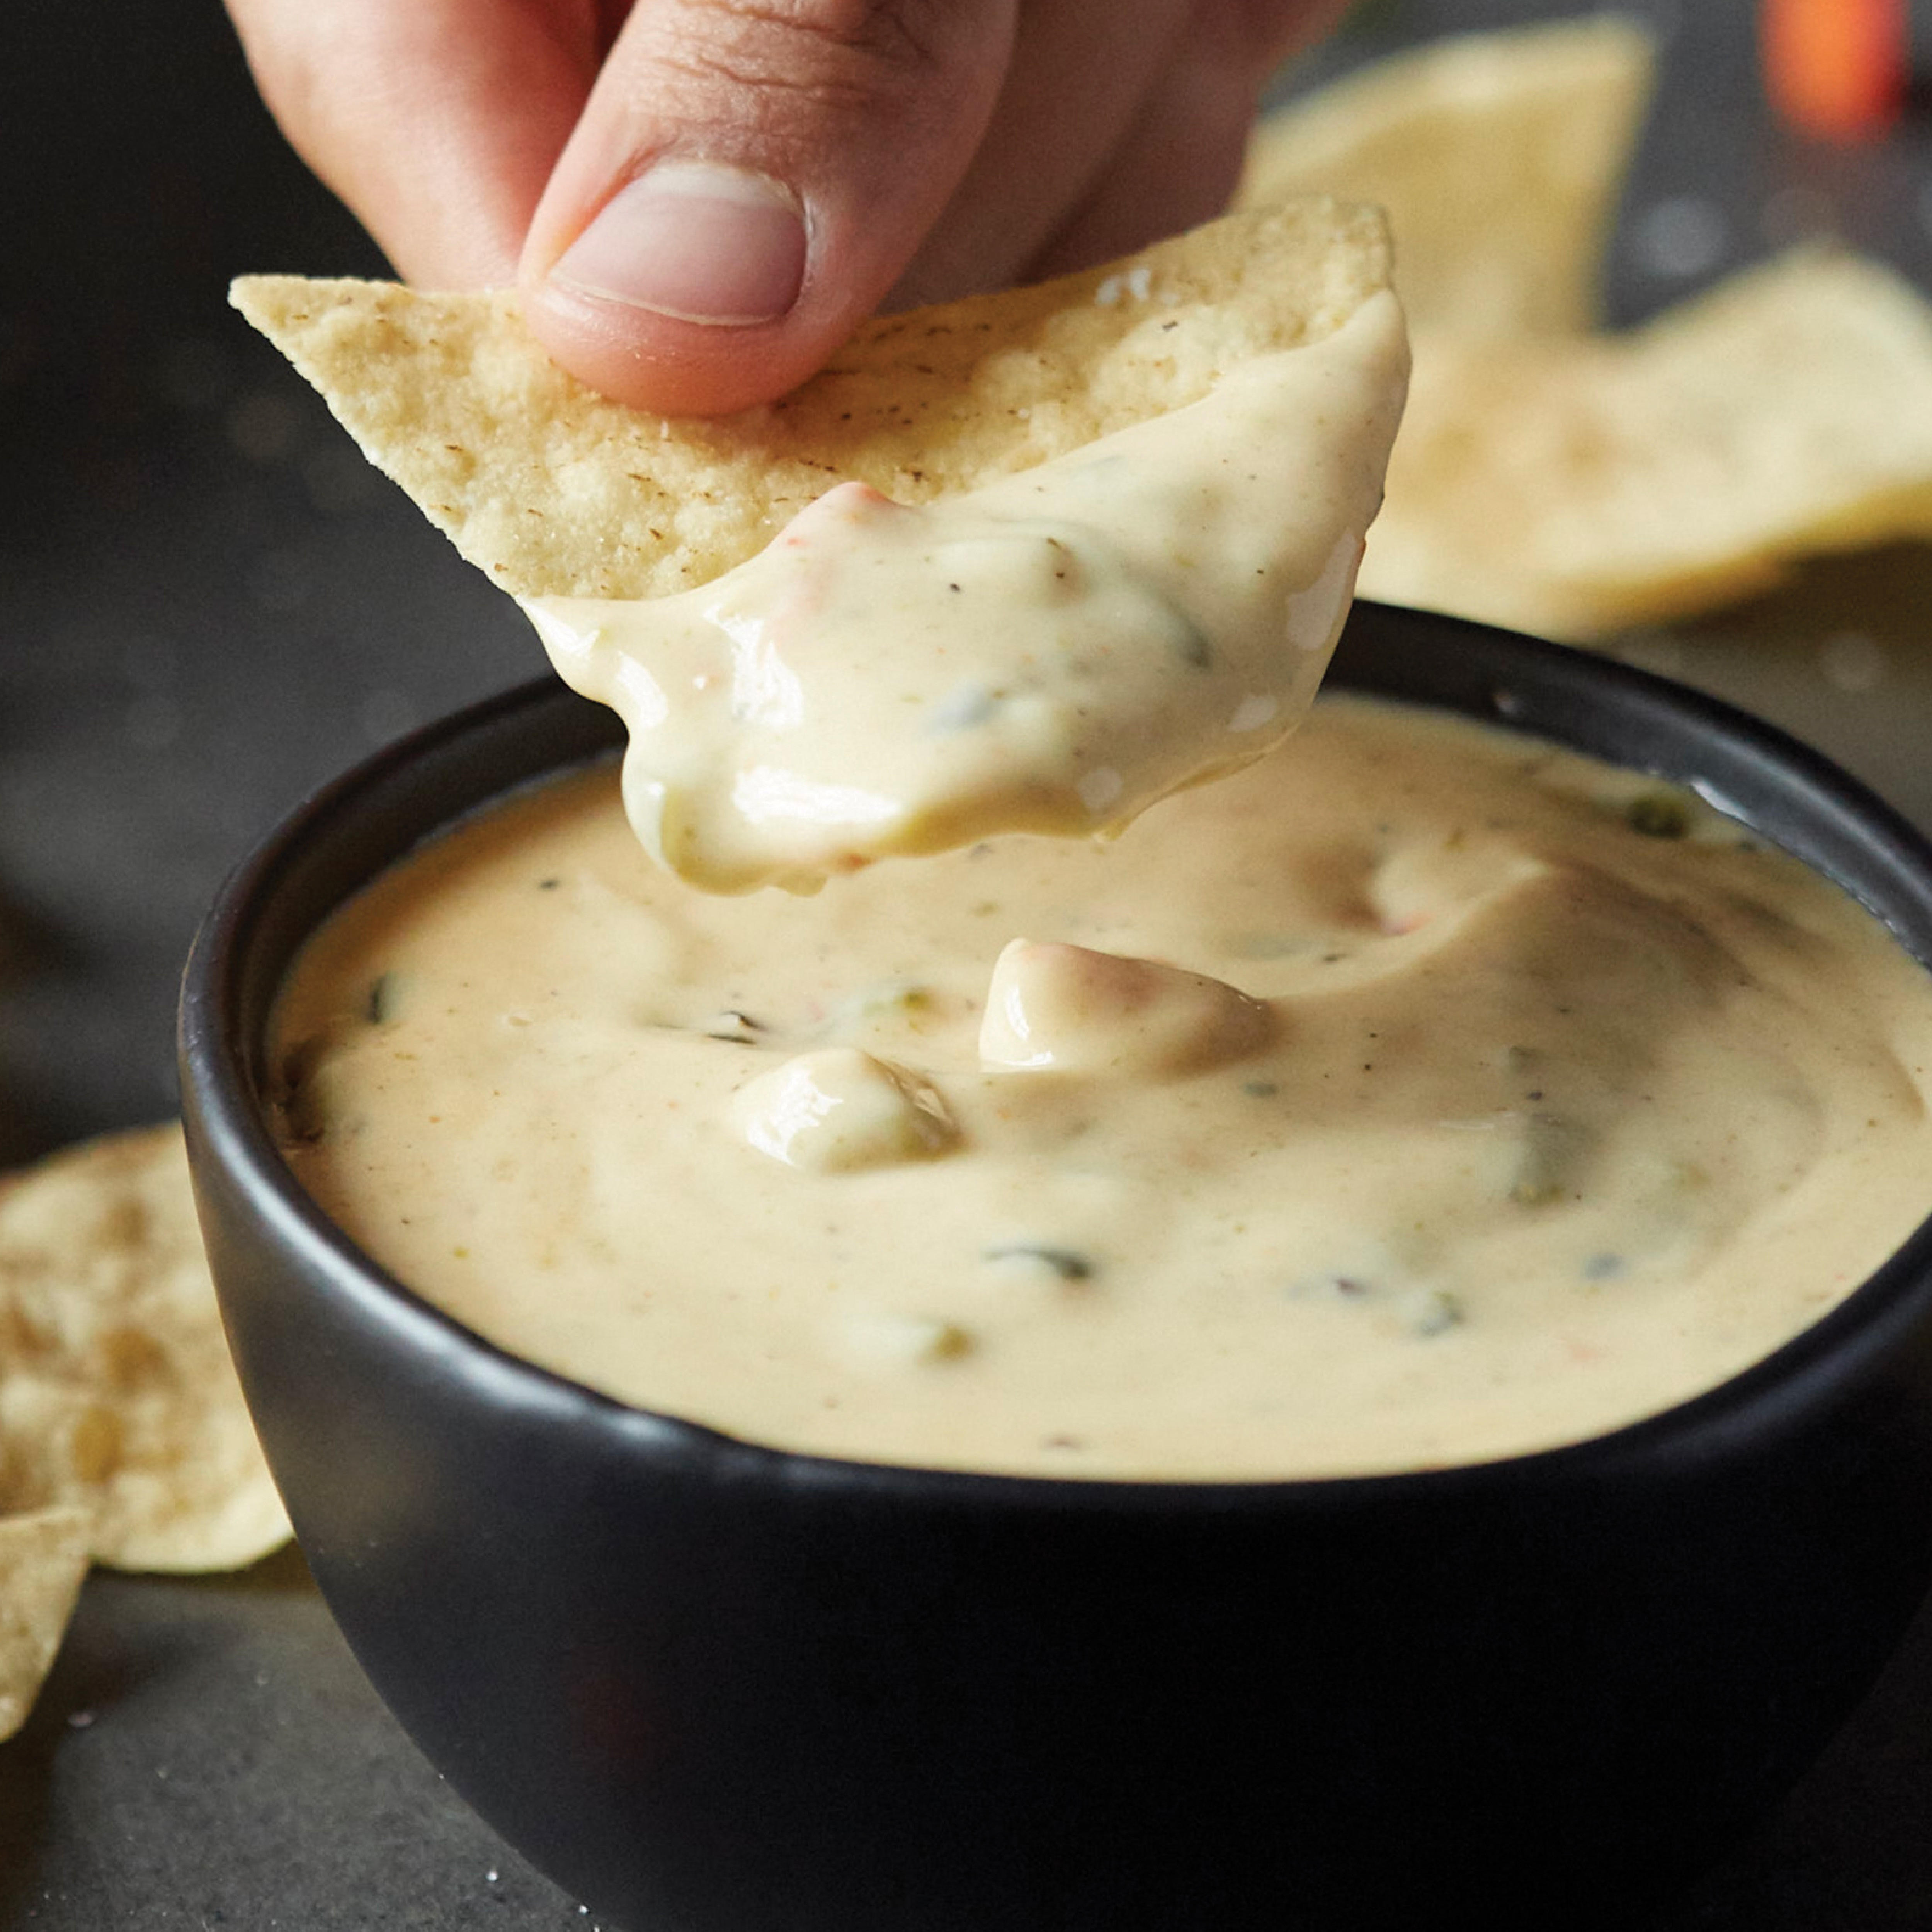 QDOBA's signature 3-cheese queso pairs perfectly with fried in-house tortilla chips or on any entreÌe at no additional charge!